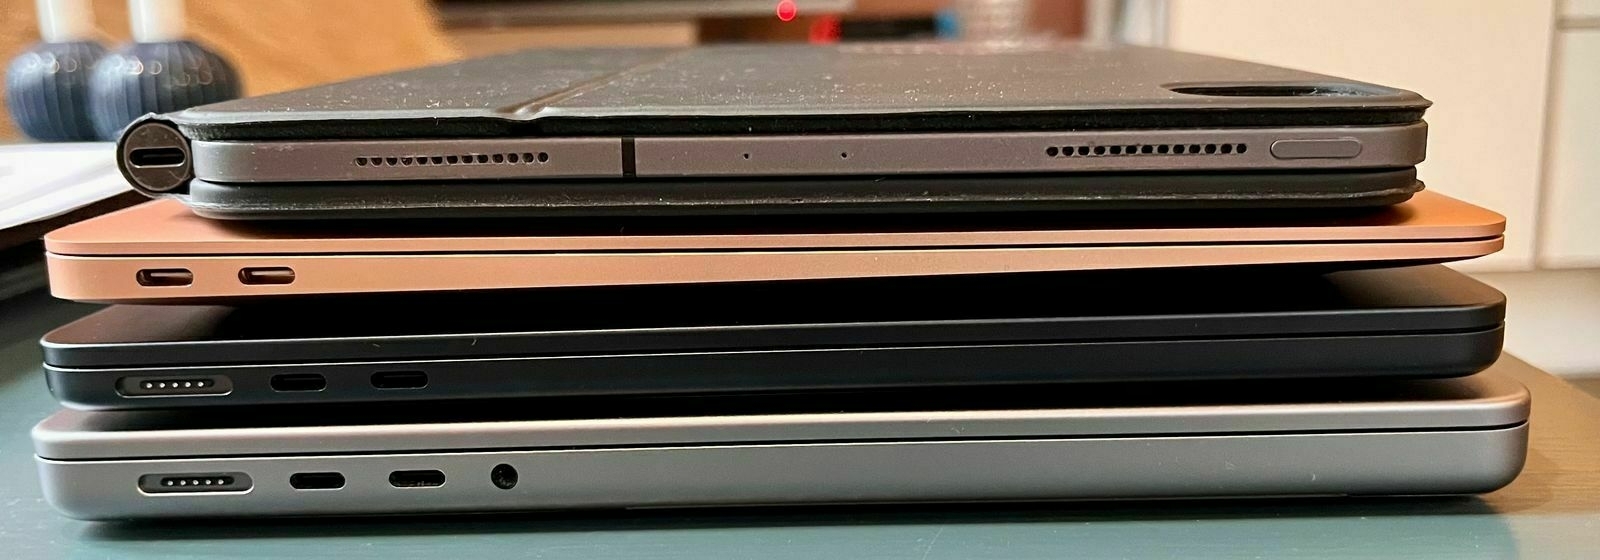 From top to bottom: iPad Pro 11-inch with Magic Keyboard, M1 MacBook Air, M2 Macbook Air, 14-inch MacBook Pro.